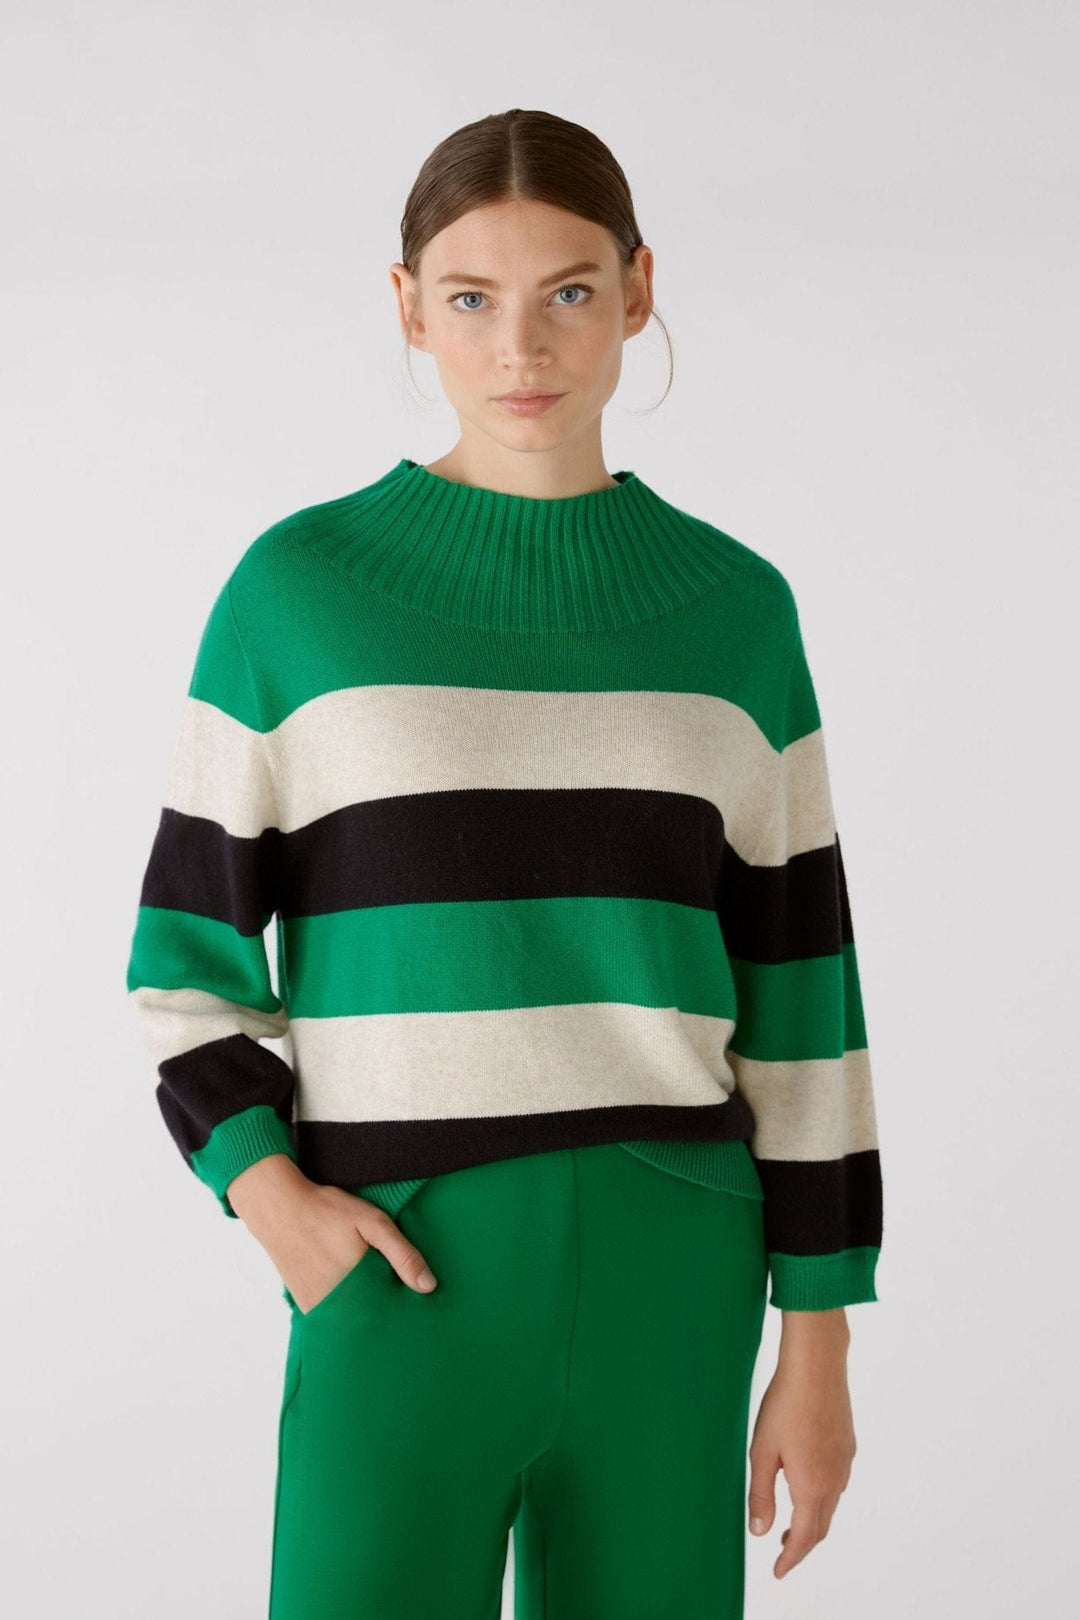 Oui Stripped turtle Neck Knitted Jumper In Green & Black Multi - Crabtree Cottage